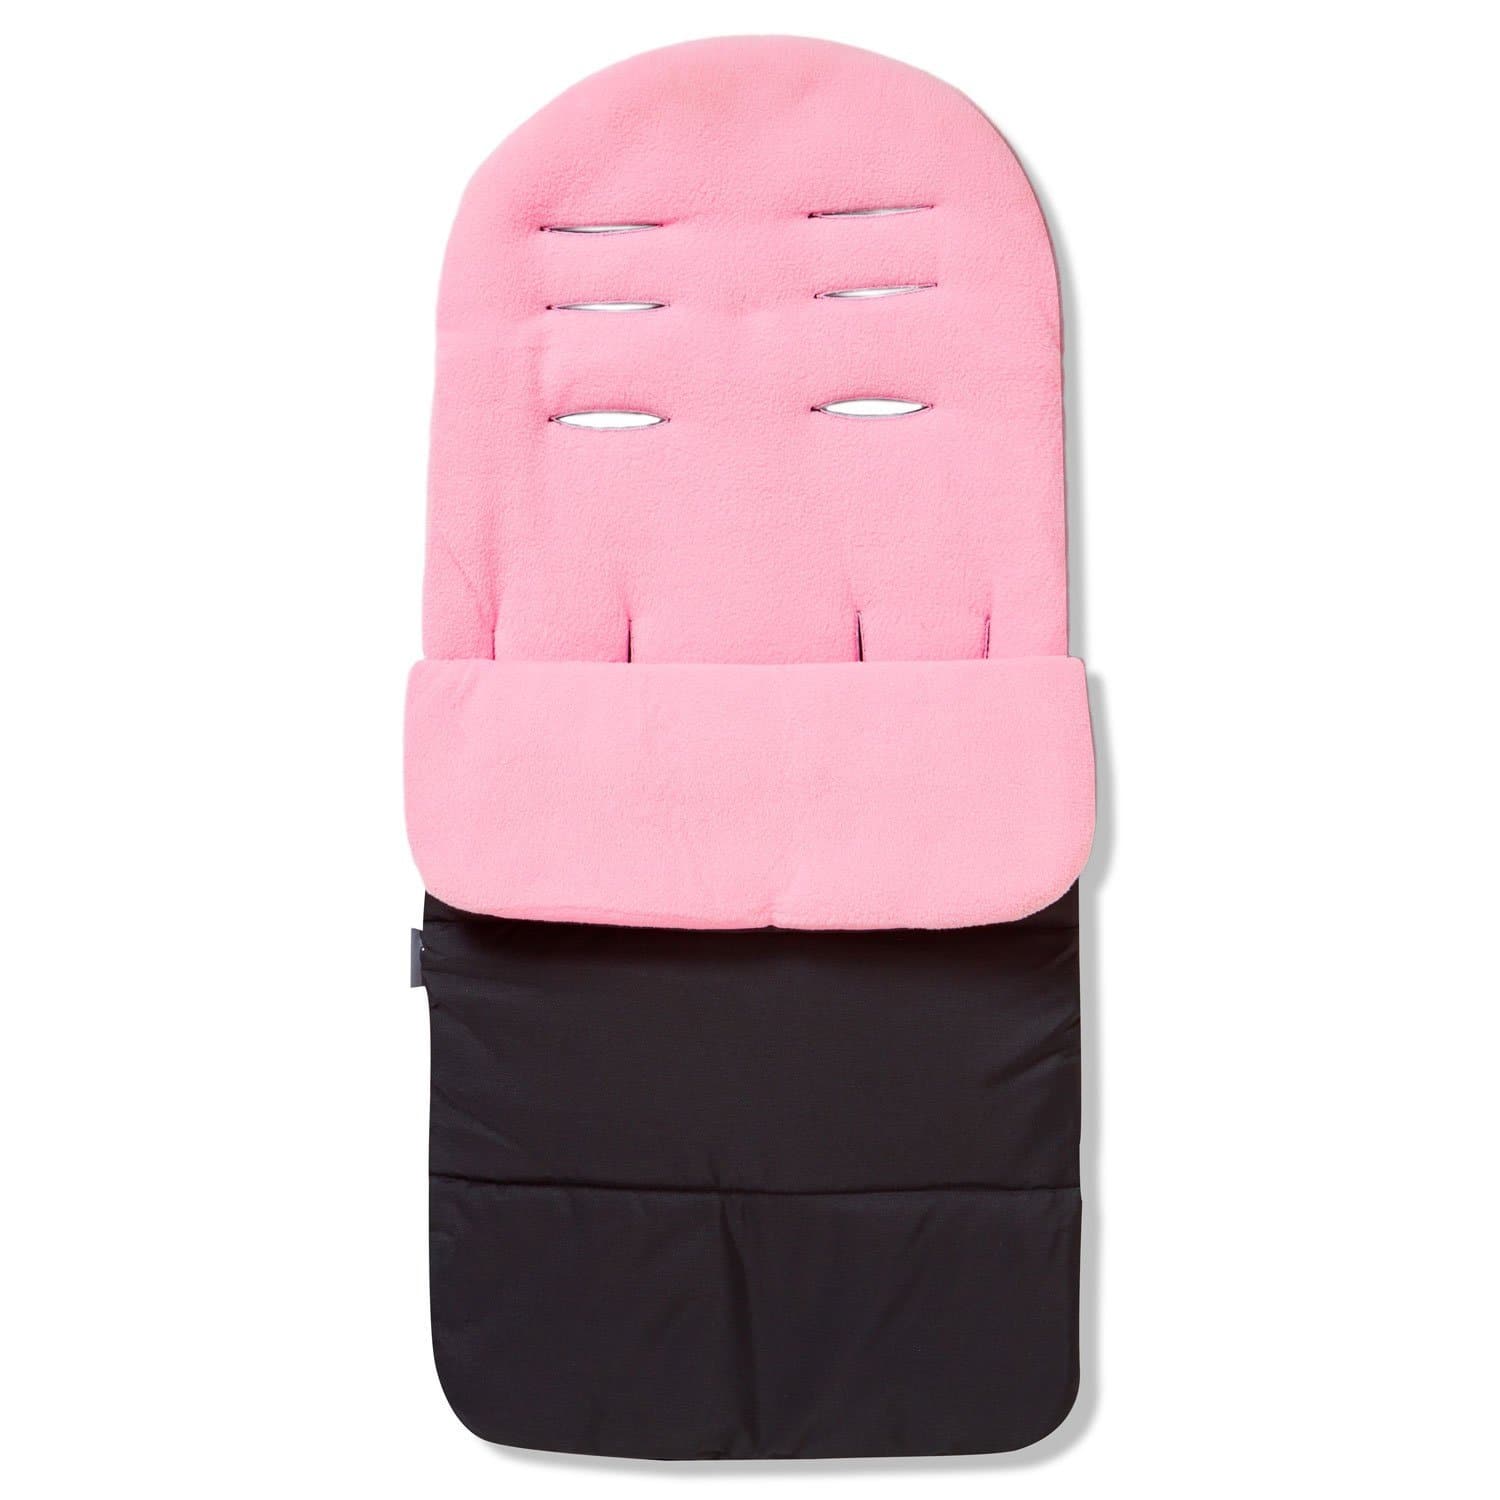 Premium Footmuff / Cosy Toes Compatible with My Babiie - For Your Little One